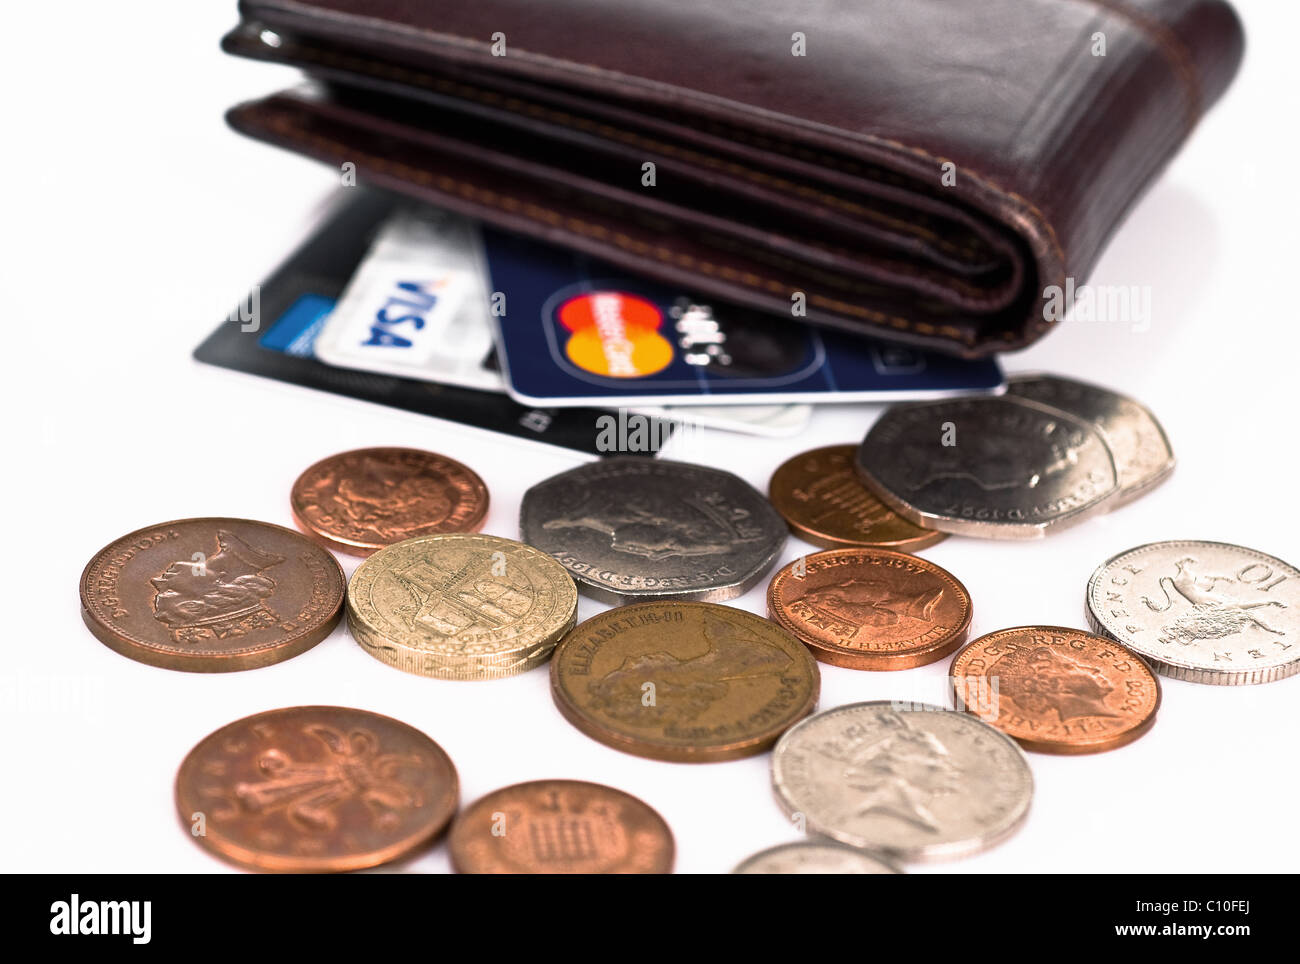 Empty wallet with credit cards- visa, mastercard, american express  and spilled pennies Stock Photo